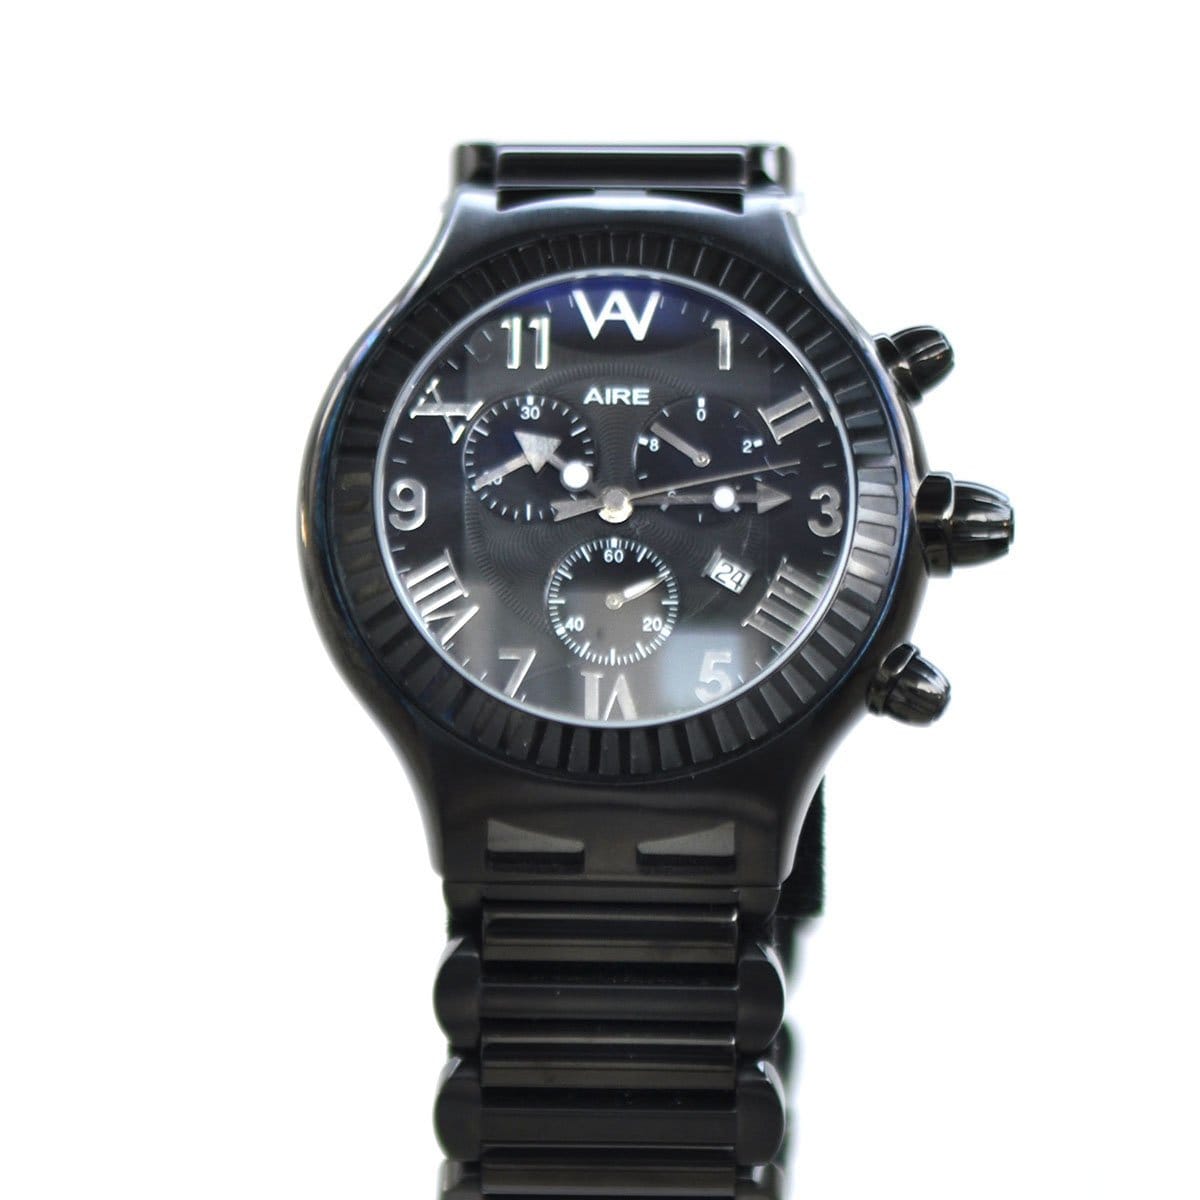 PARLAY BLACK WATCH - Chris Aire Fine Jewelry & Timepieces